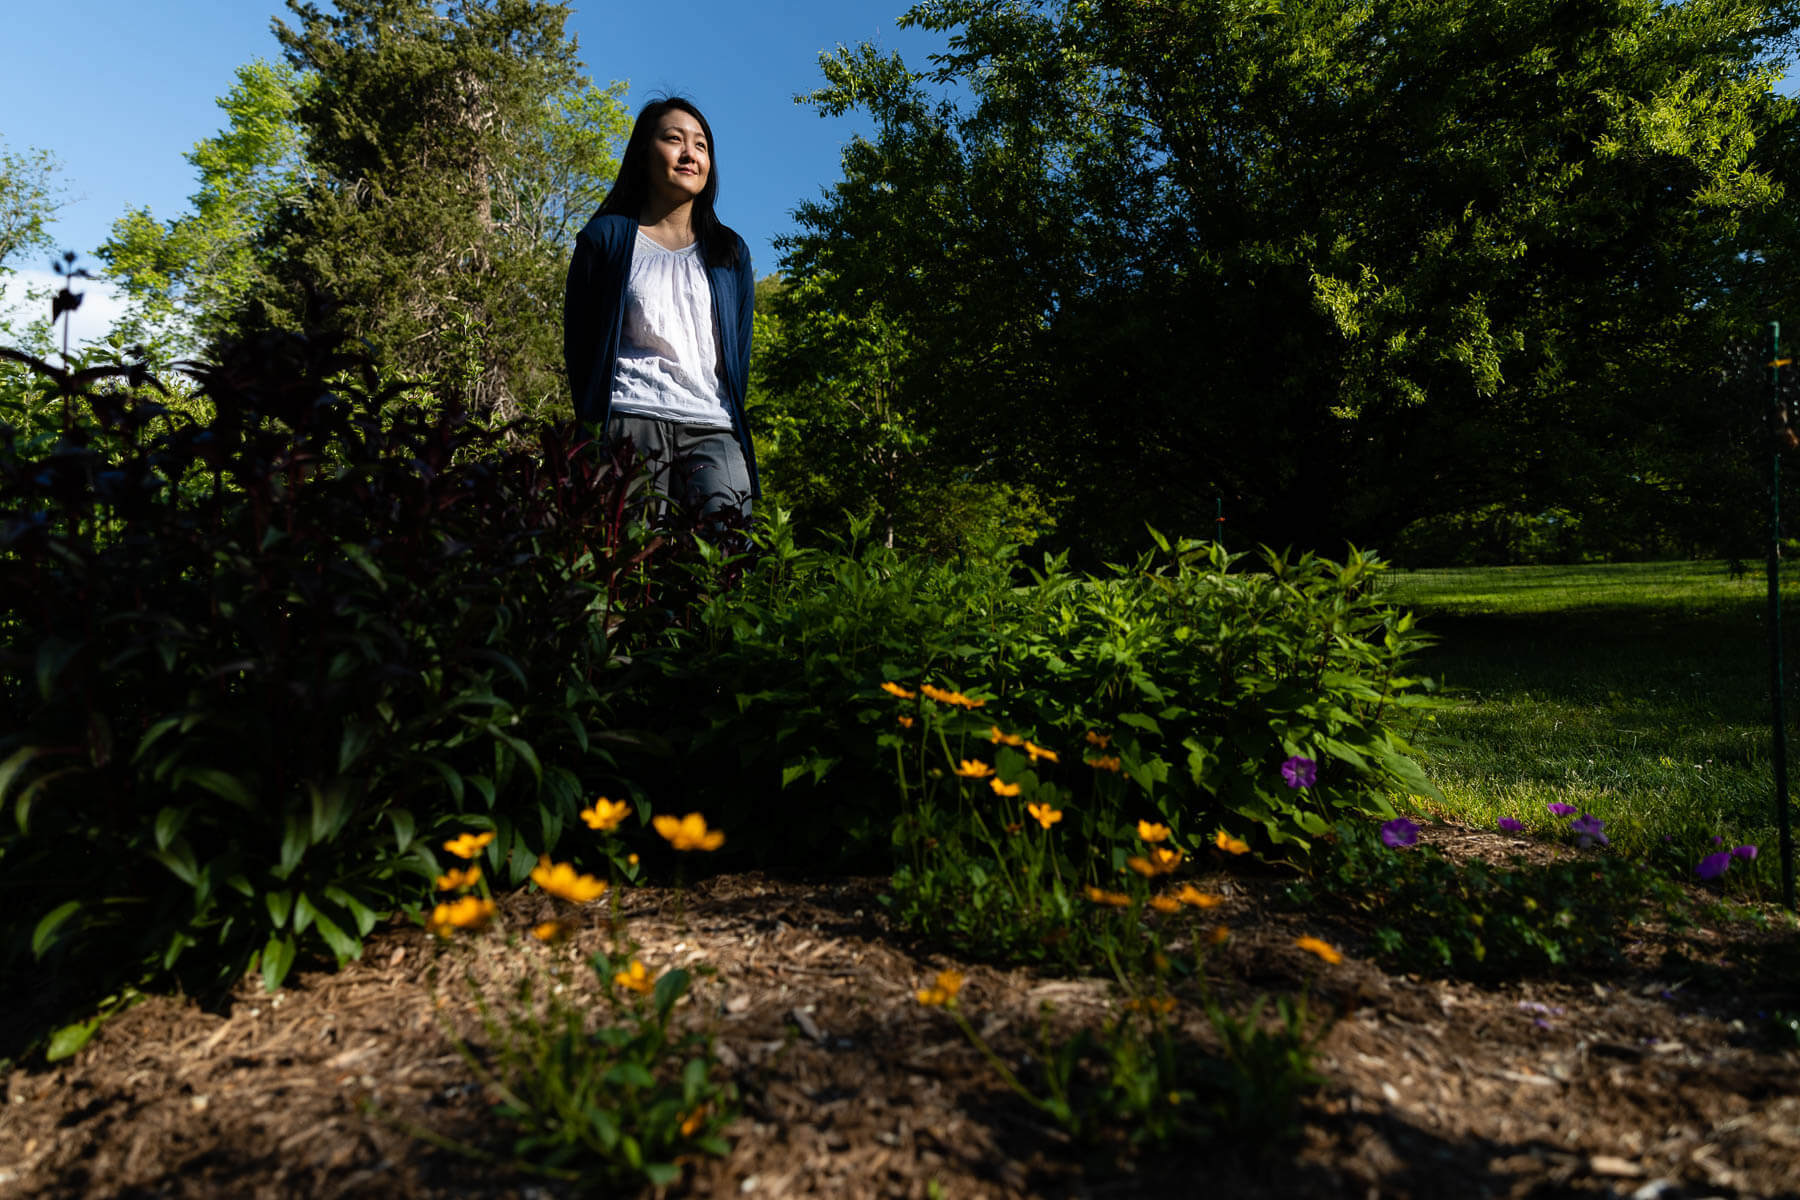 Chao at a community park, where she obtained funding for native plants through a grant from Unity Gardens.